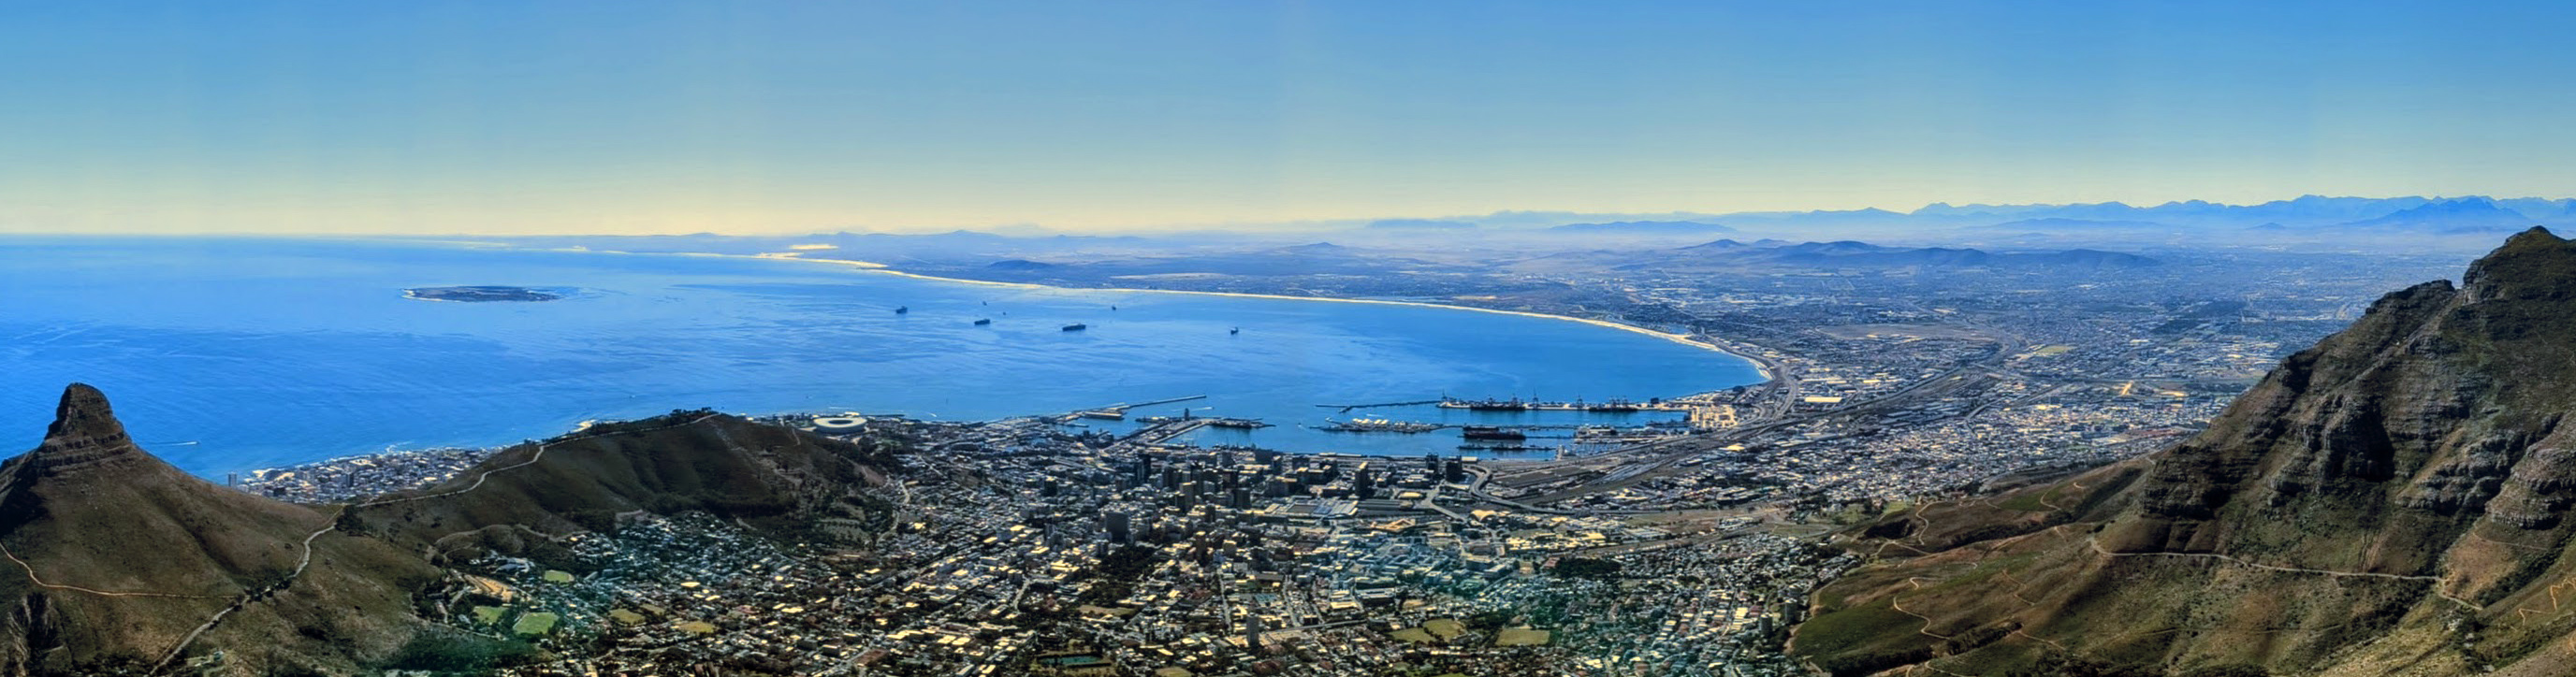 Table Bay Most Up-to-Date Encyclopedia, News and Reviews pic